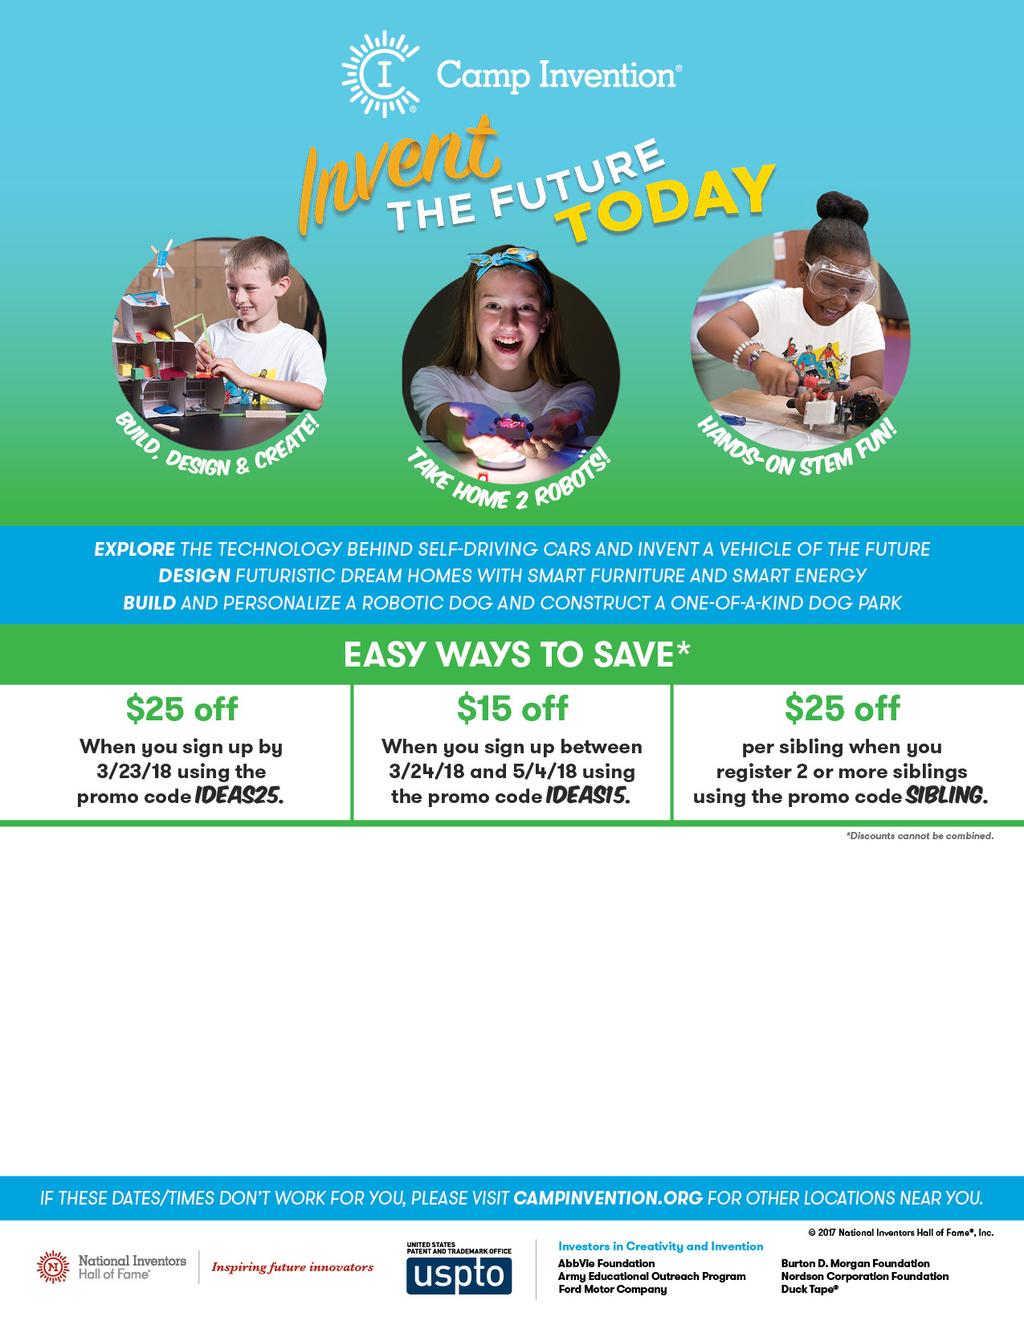 Your local Camp Invention site information: Your local Camp Invention site information: July 30 - August 3, 2018 8:30 a.m. - 3:00 p.m. Price $225 (before discount) For children entering grades K 6 Register at campinvention.